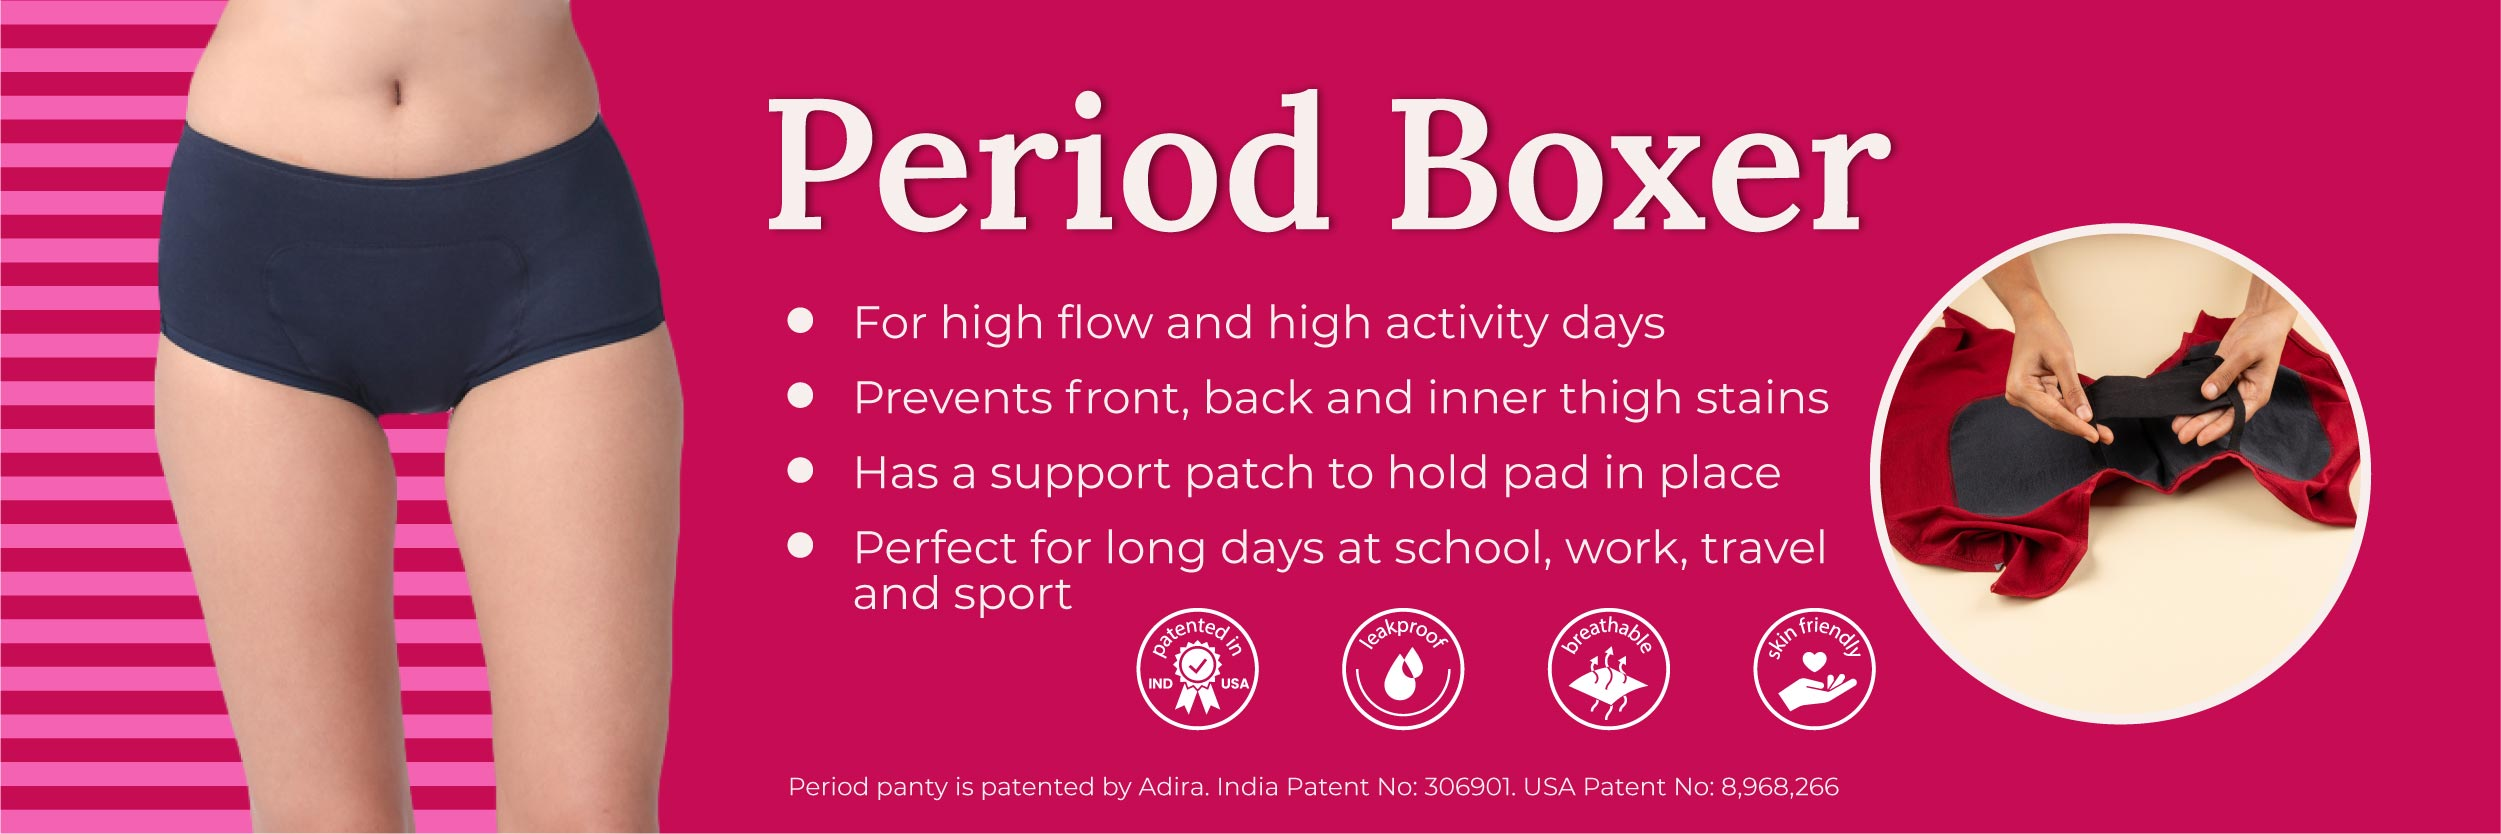 Buy Adira, Reusable Period Underwear, Boxer Fit For High Flow, Reusable, With Support Patch For Pad, Leakproof & Skin Friendly, For School,  Travel & Work